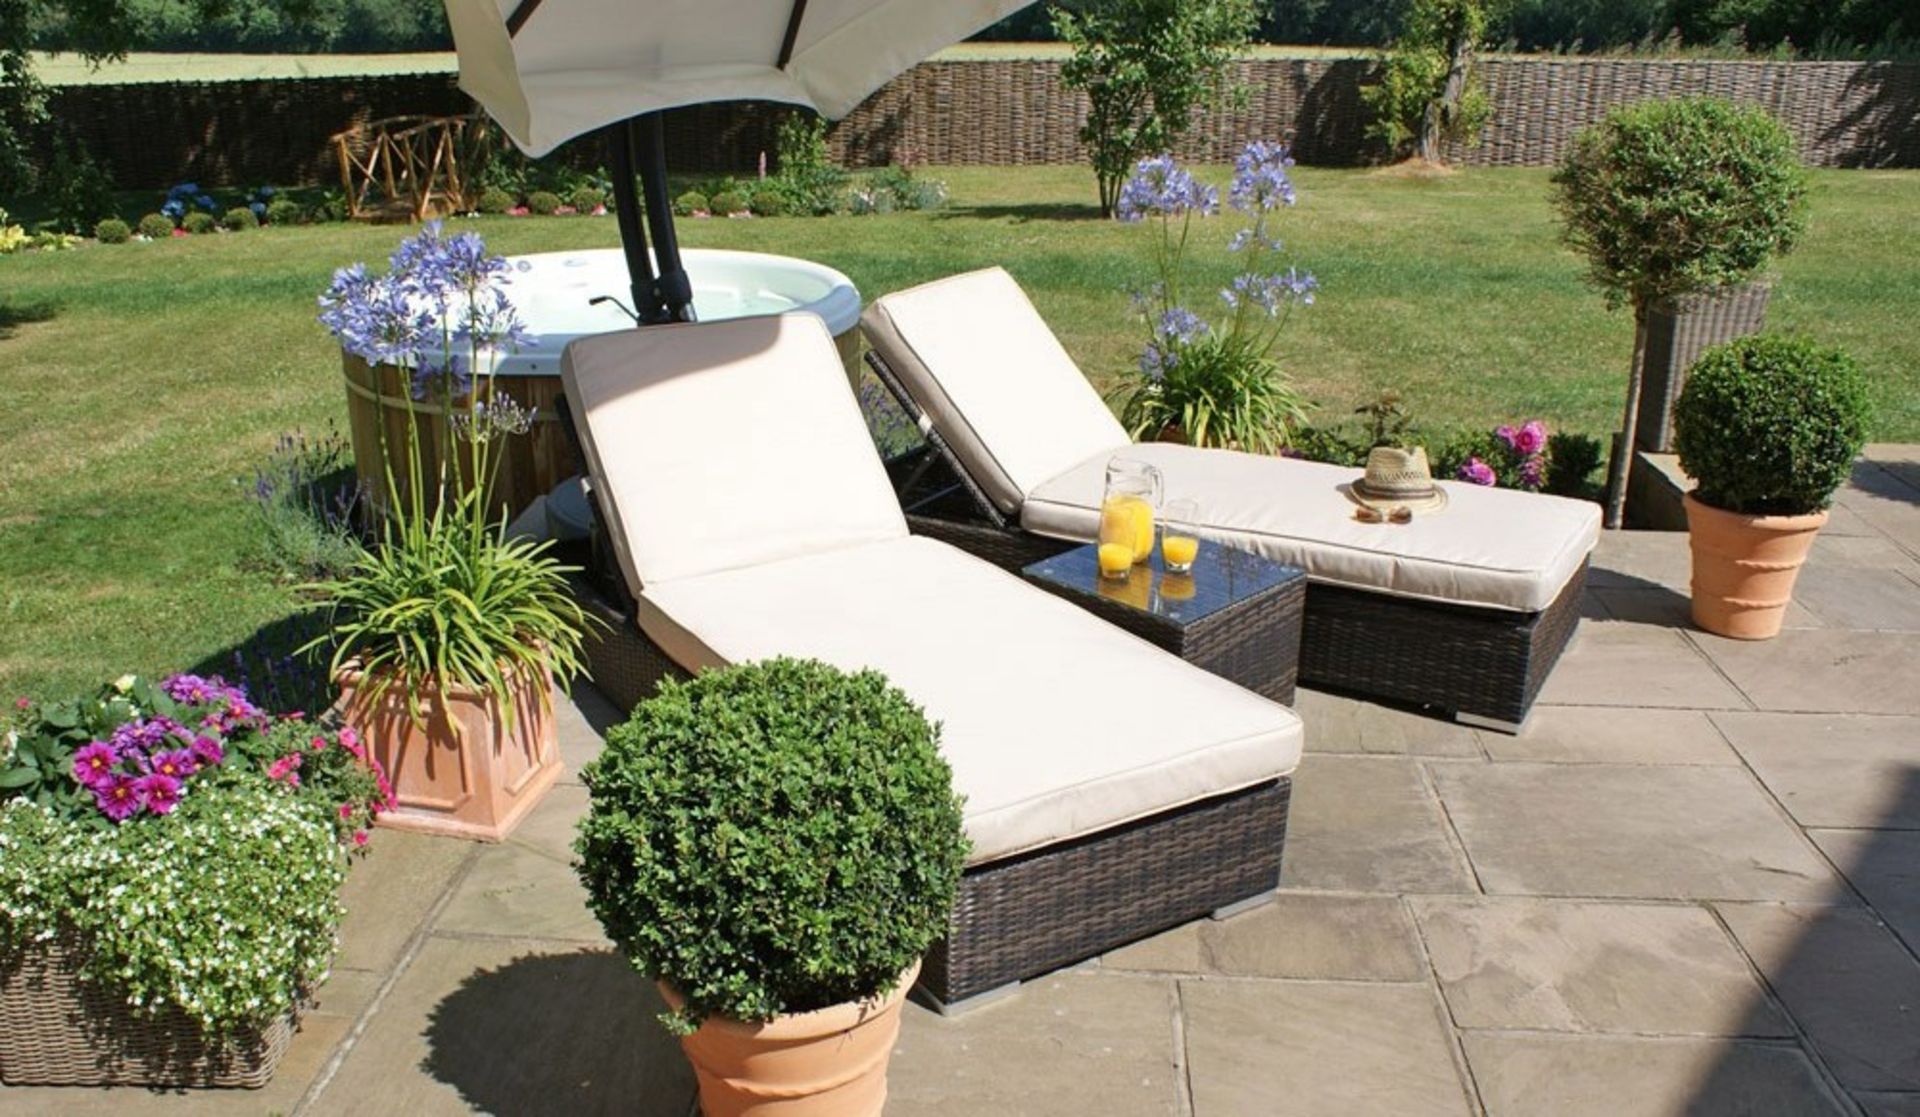 + VAT Brand New Chelsea Garden Company Sunloungers And Table Set - Includes Two Sunloungers -